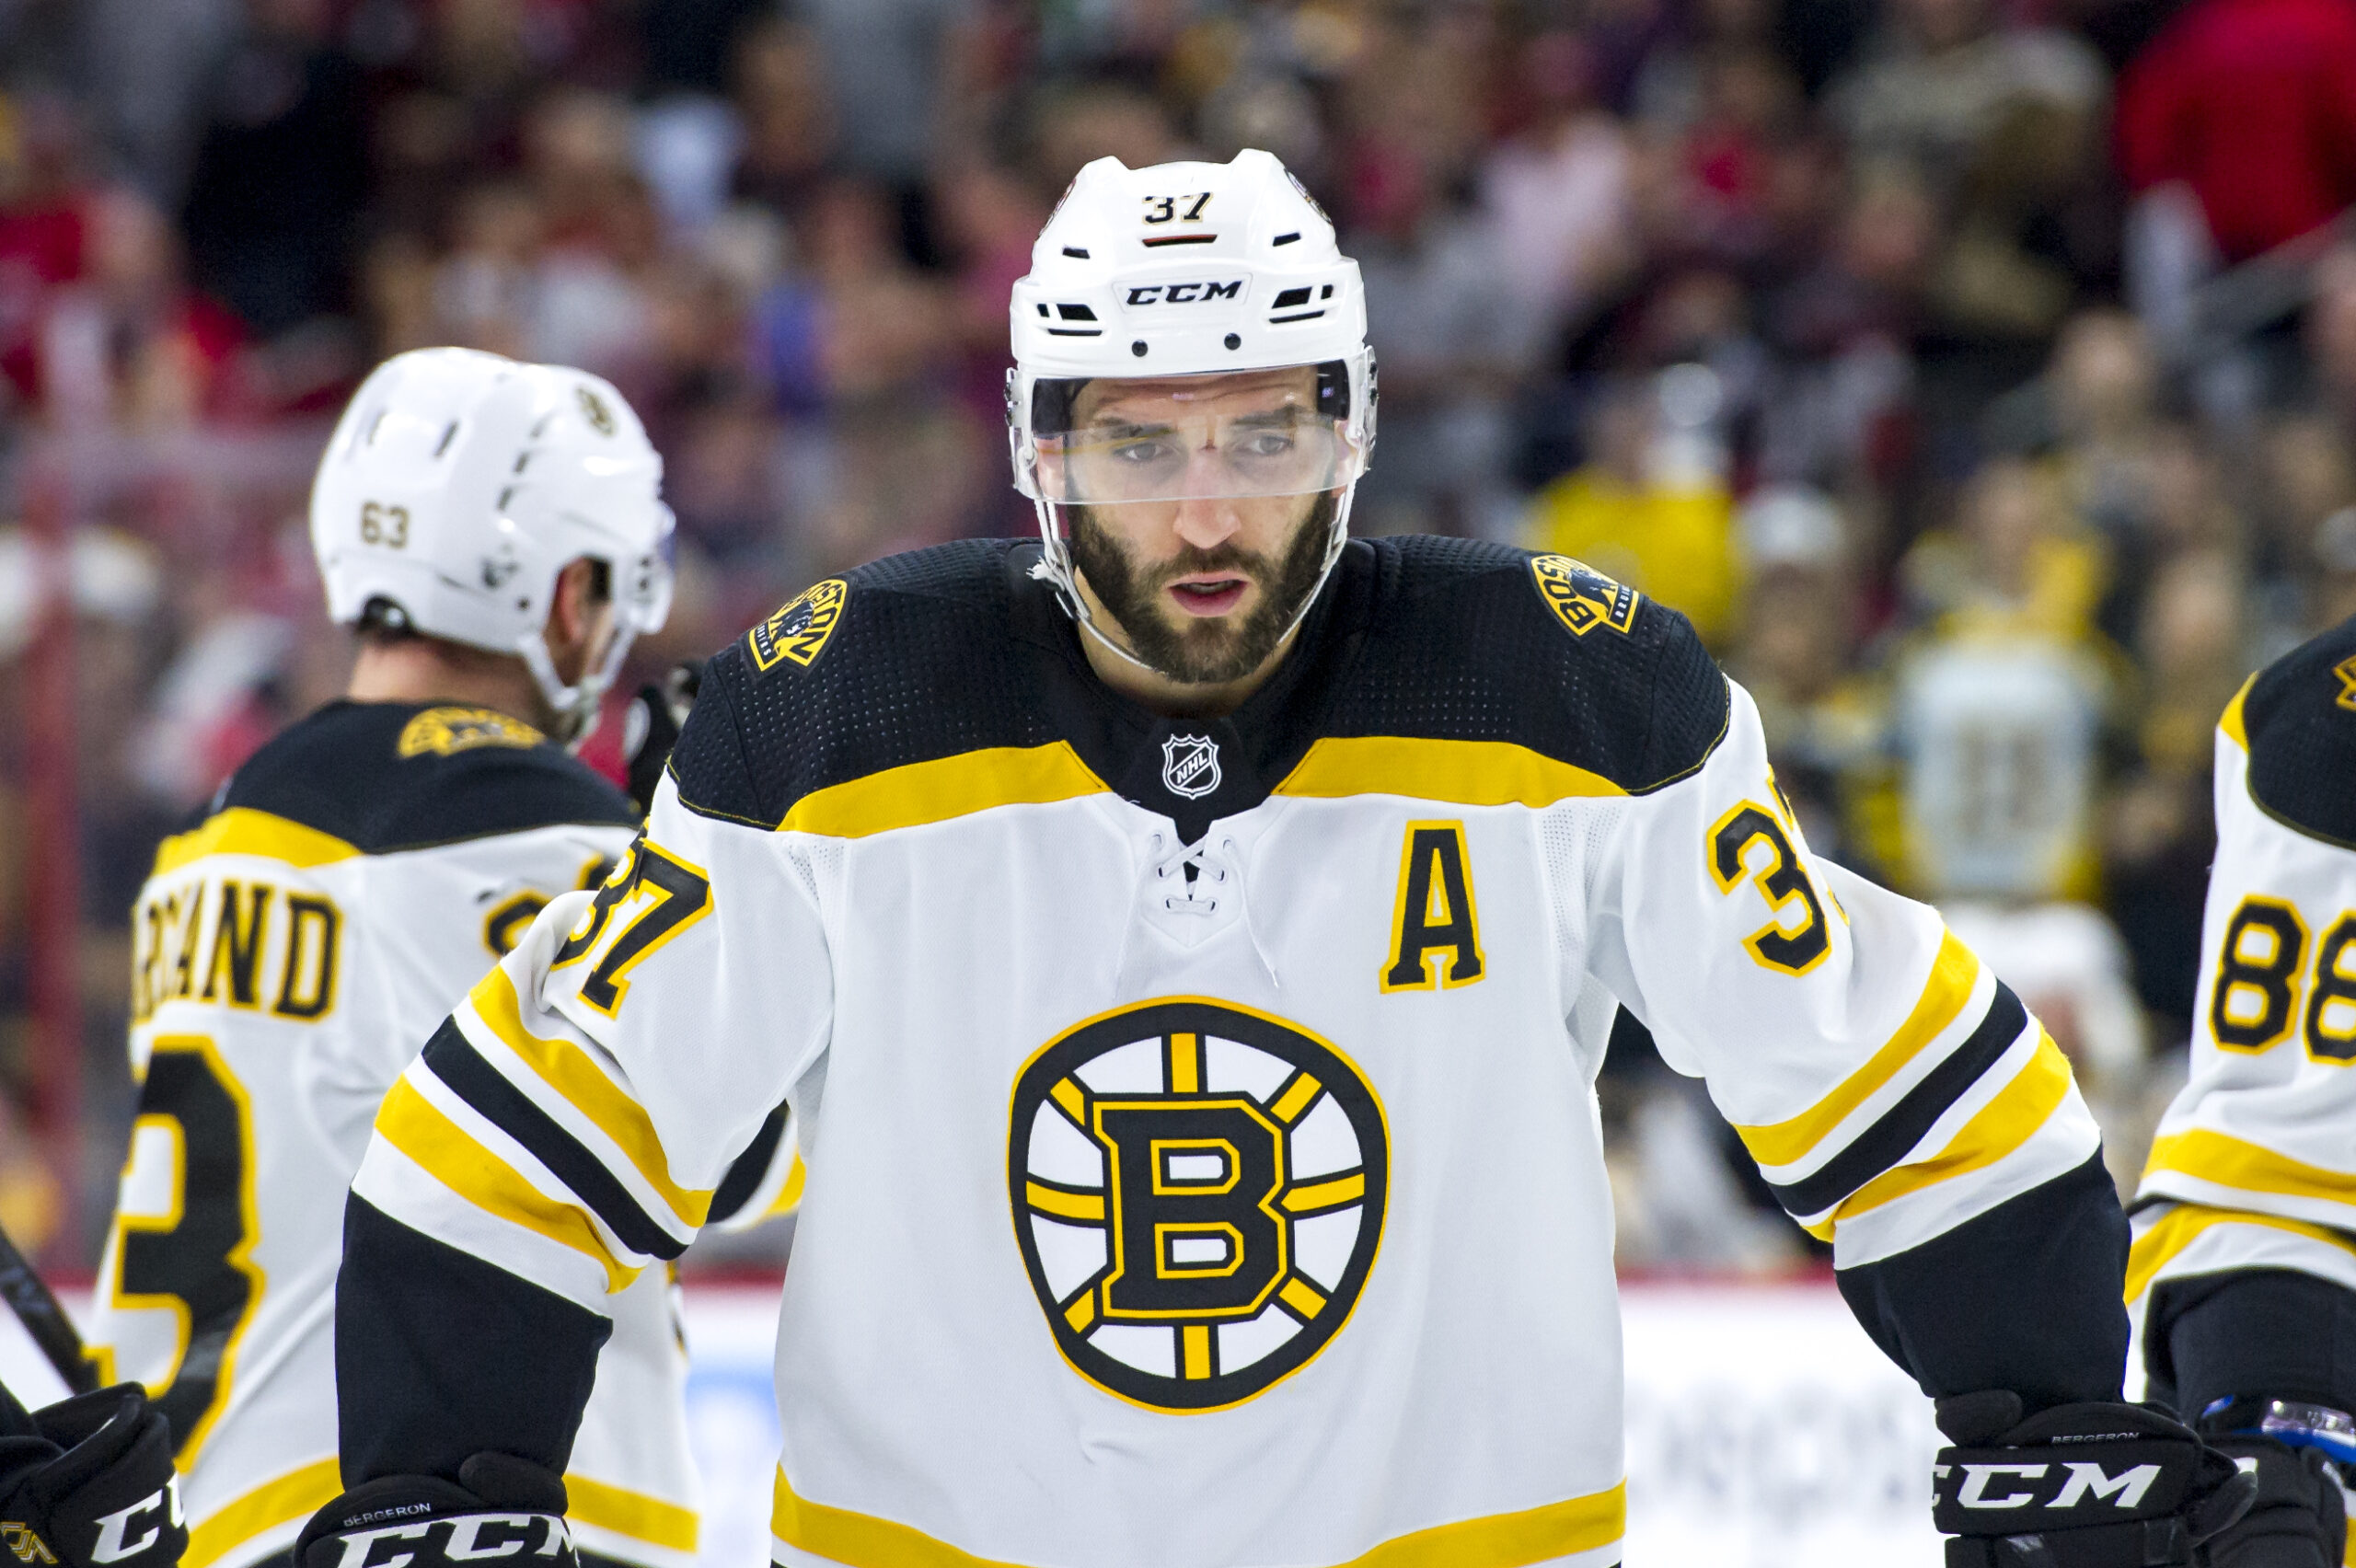 A Few Words With Patrice Bergeron